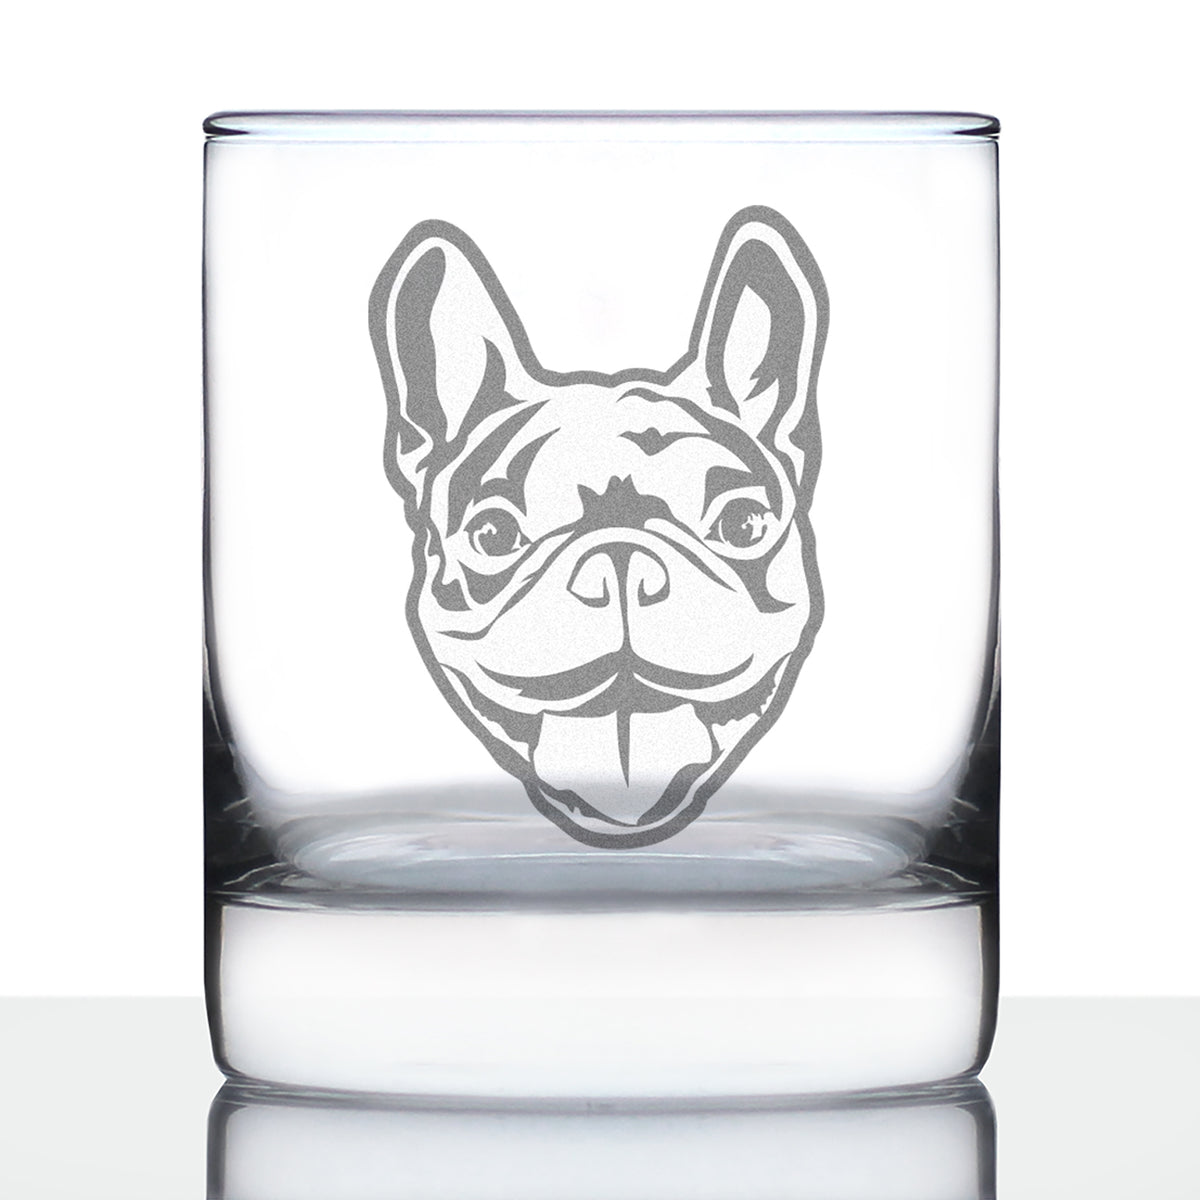 Happy Frenchie - Whiskey Rocks Glass - Unique French Bulldog Themed Gifts or Party Decor for Women and Men - 10.25 Oz